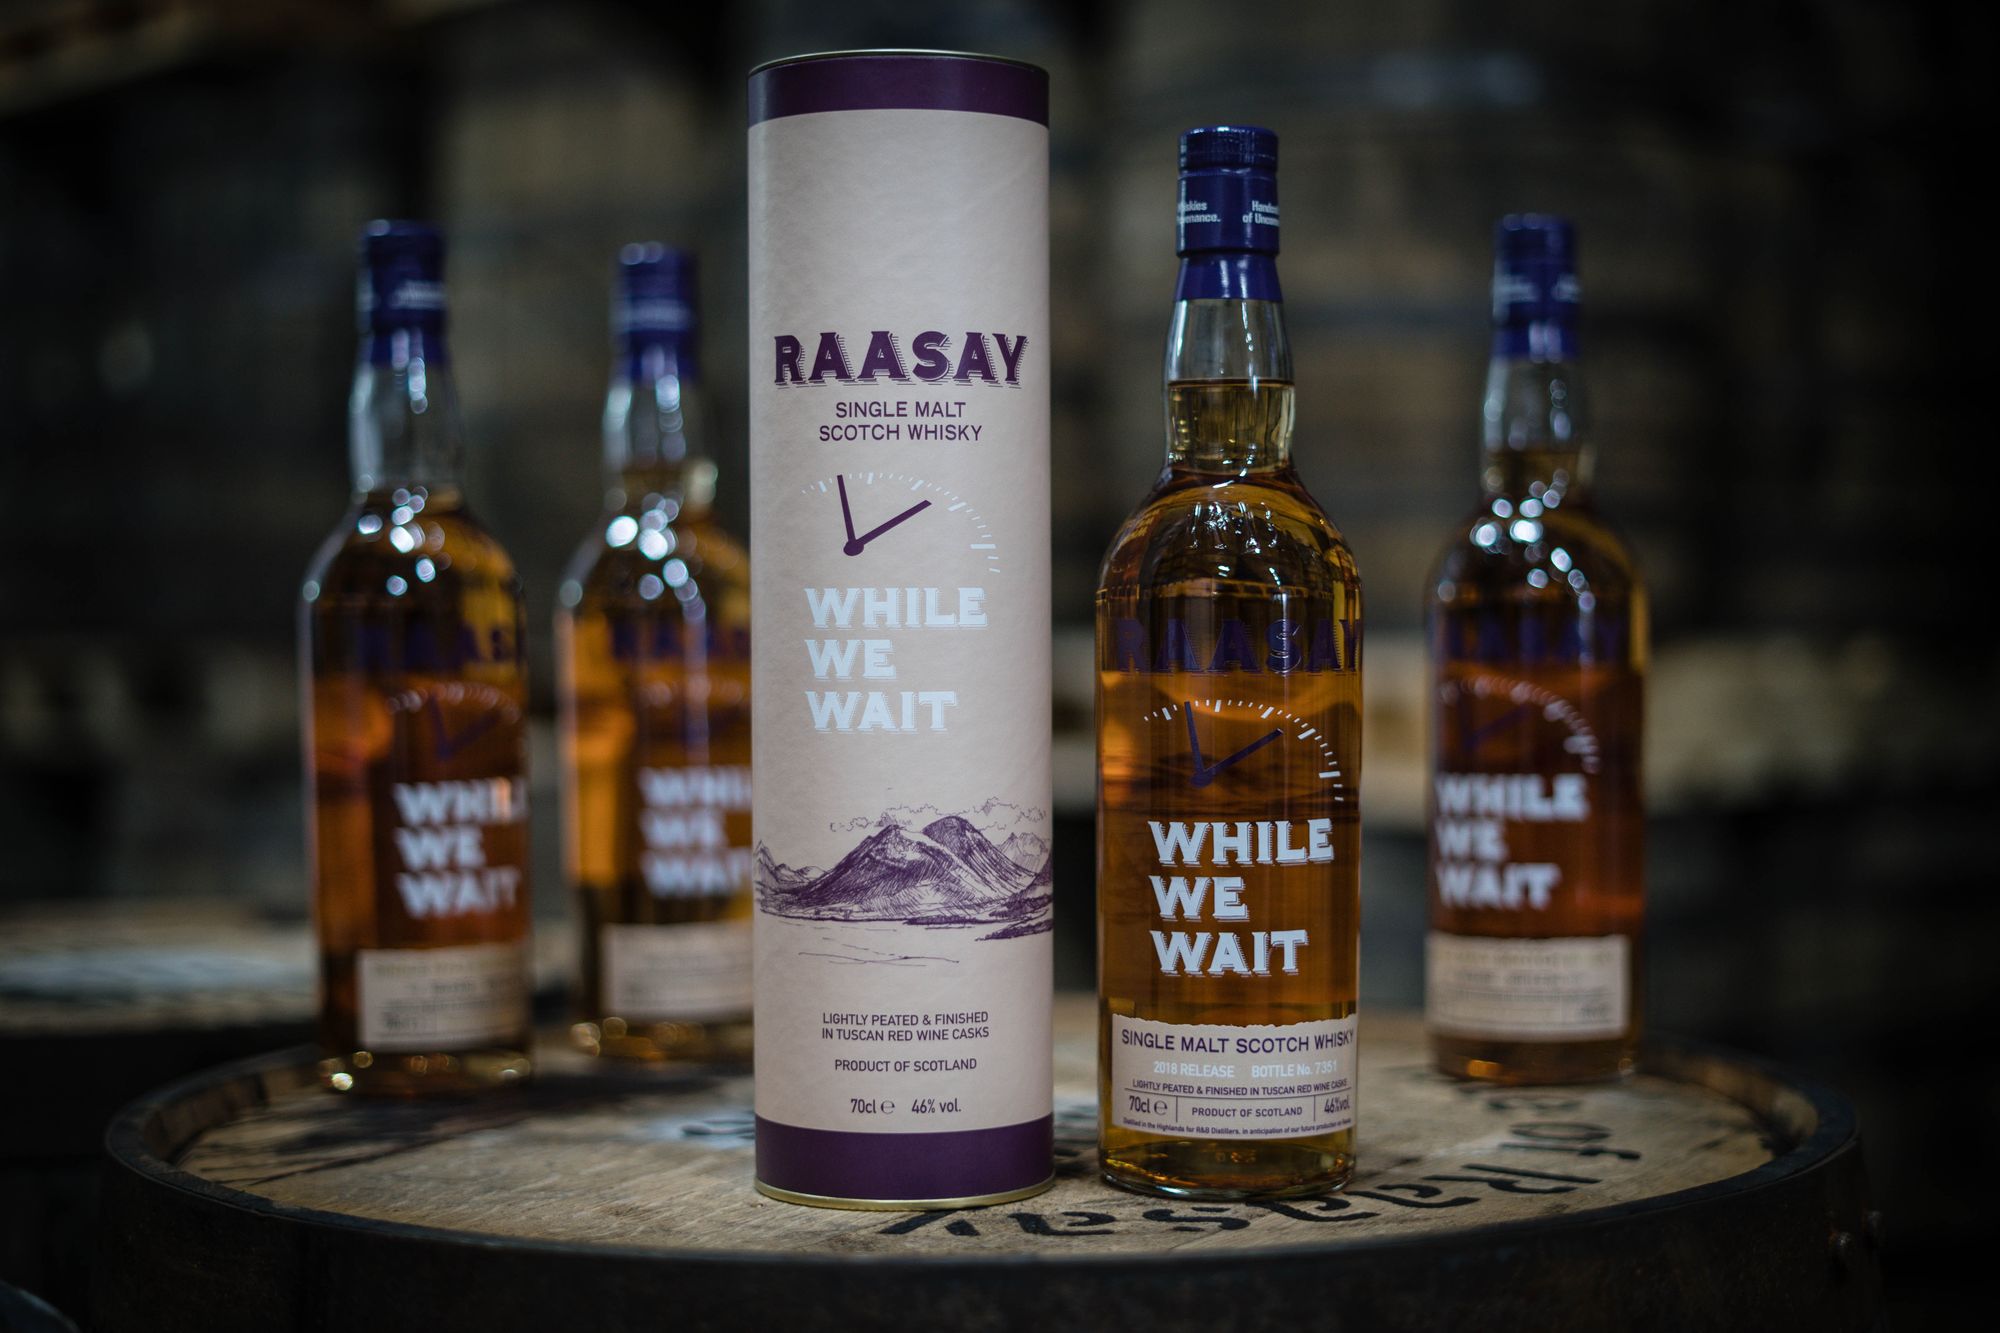 Raasay While We Wait launches in the US!